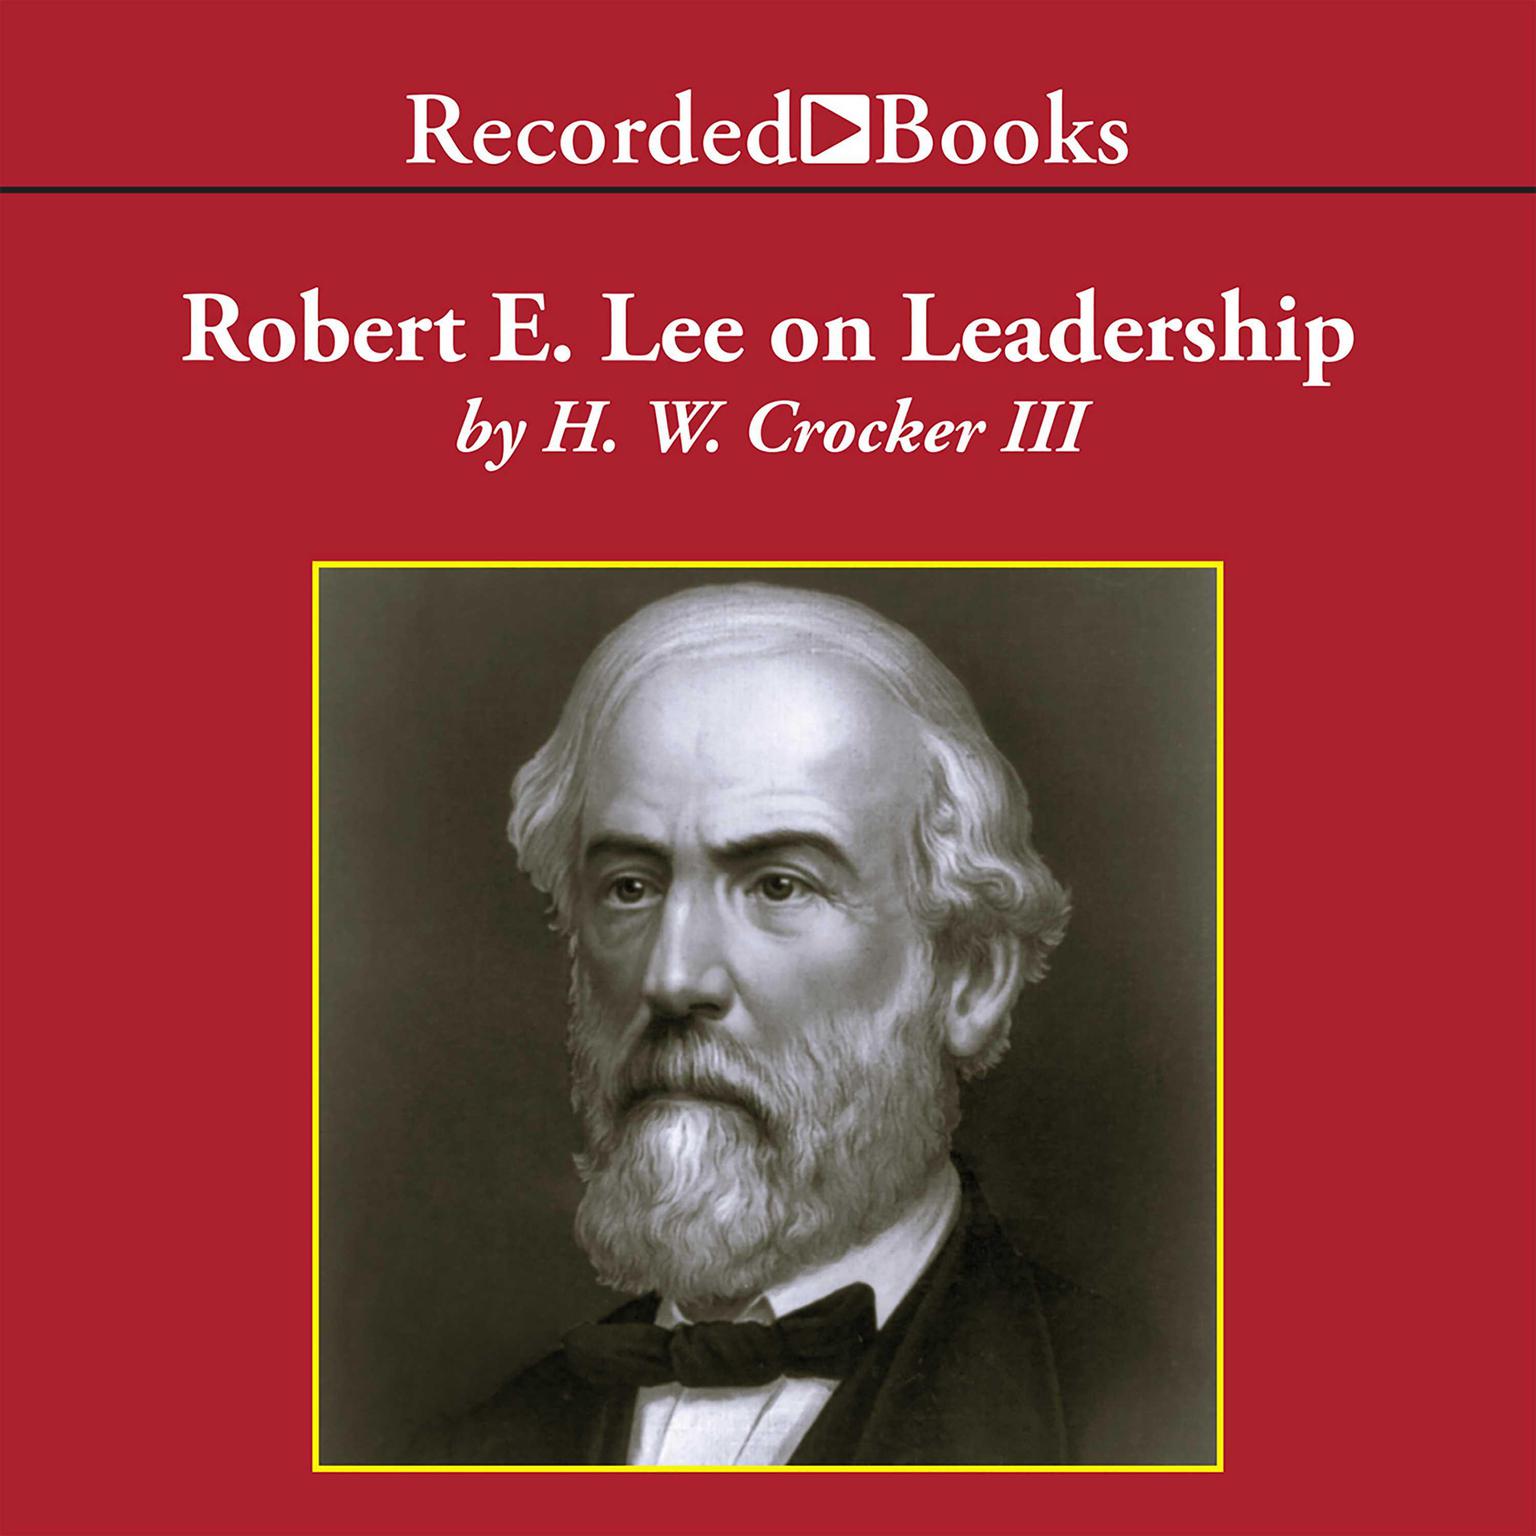 Robert E. Lee on Leadership: Executive Lessons in Character, Courage, and Vision Audiobook, by H. W. Crocker